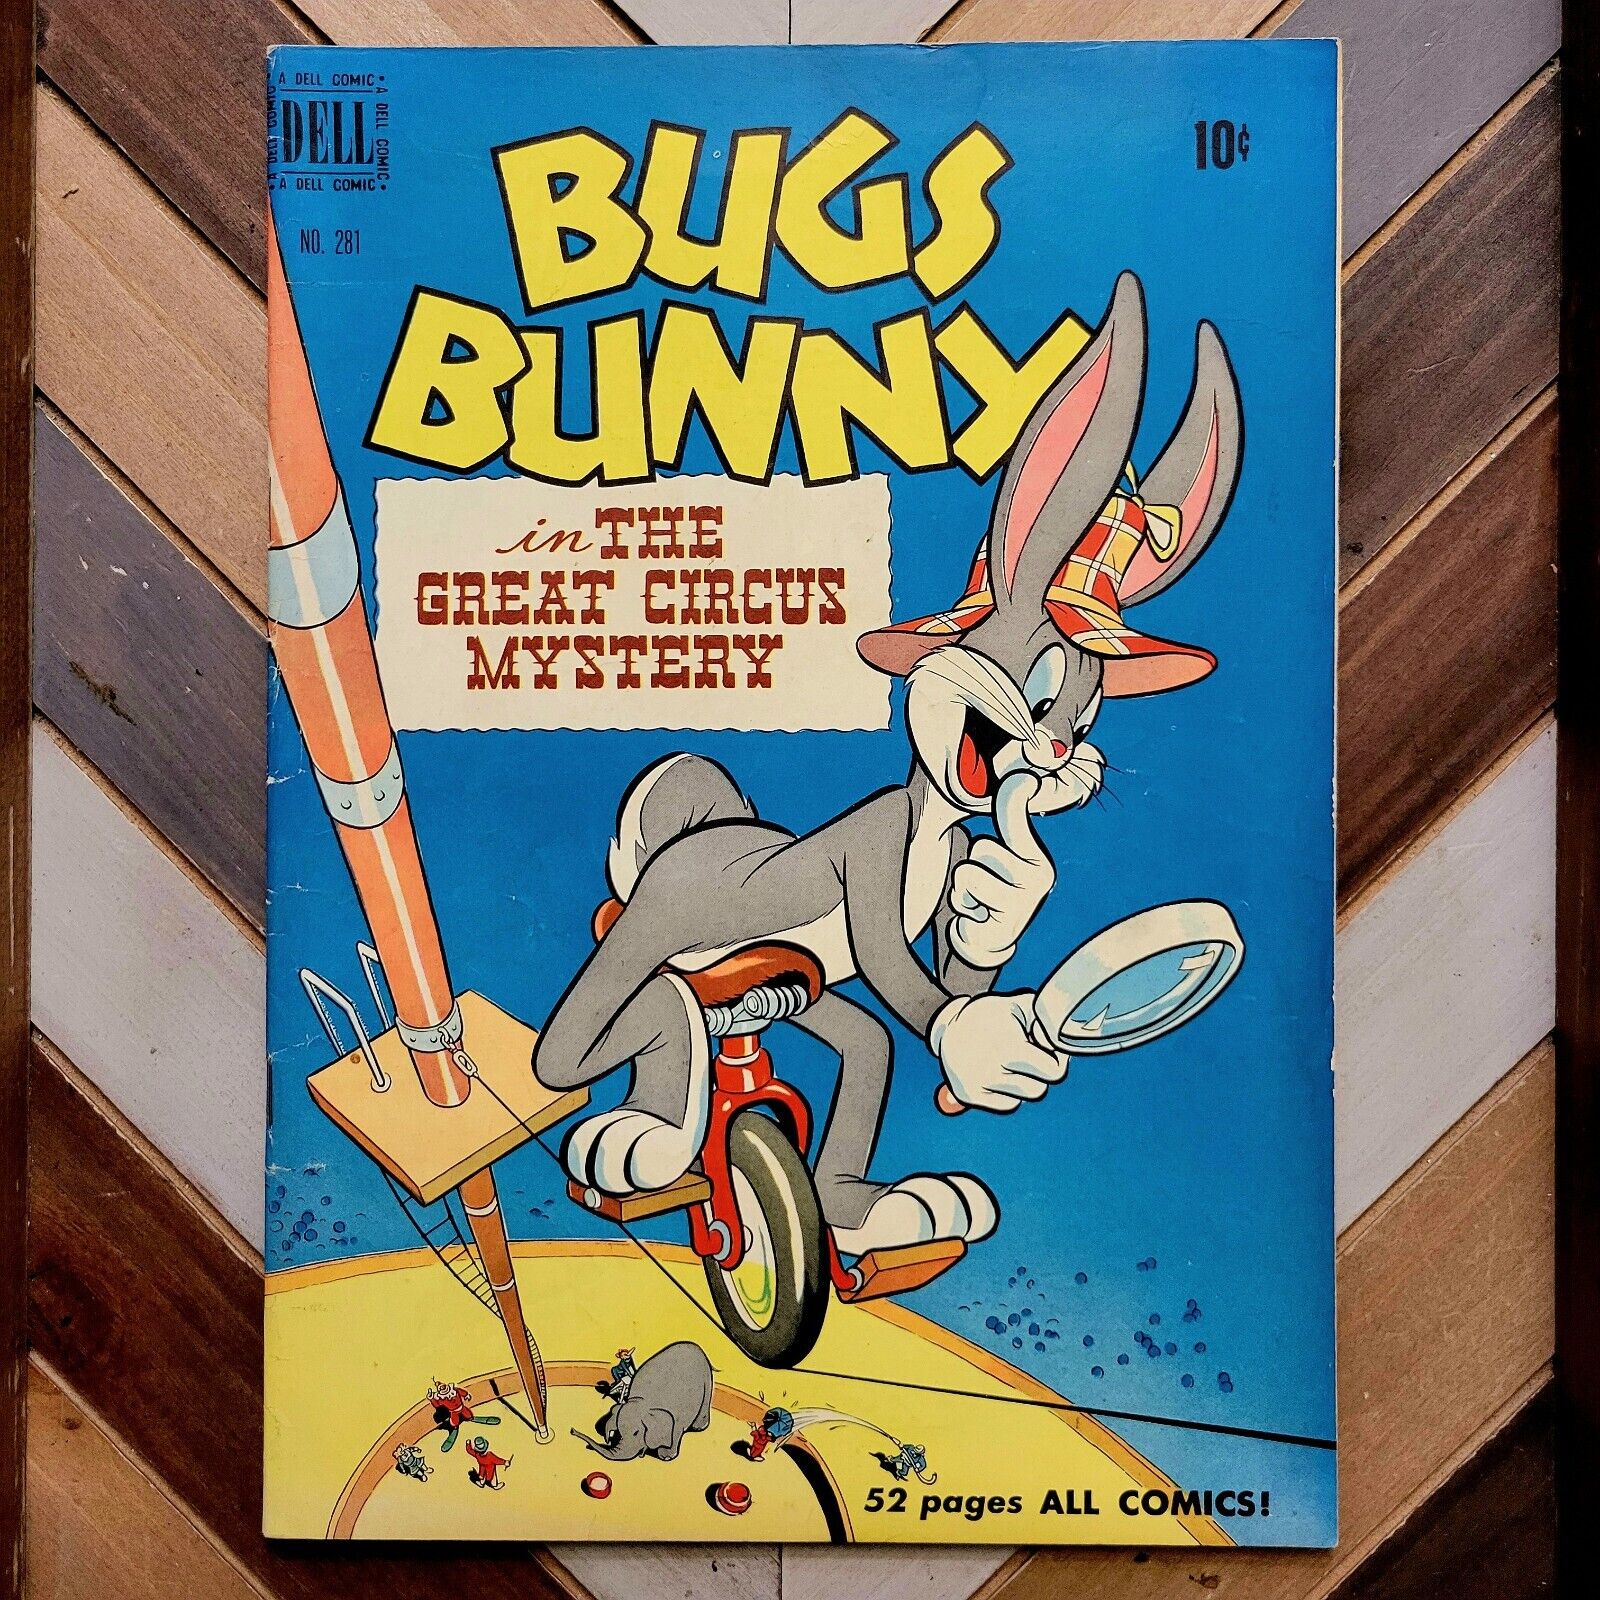 FOUR COLOR #281 FN (Dell 1950) BUGS BUNNY Circus Mystery | Pre-Code Golden Age 